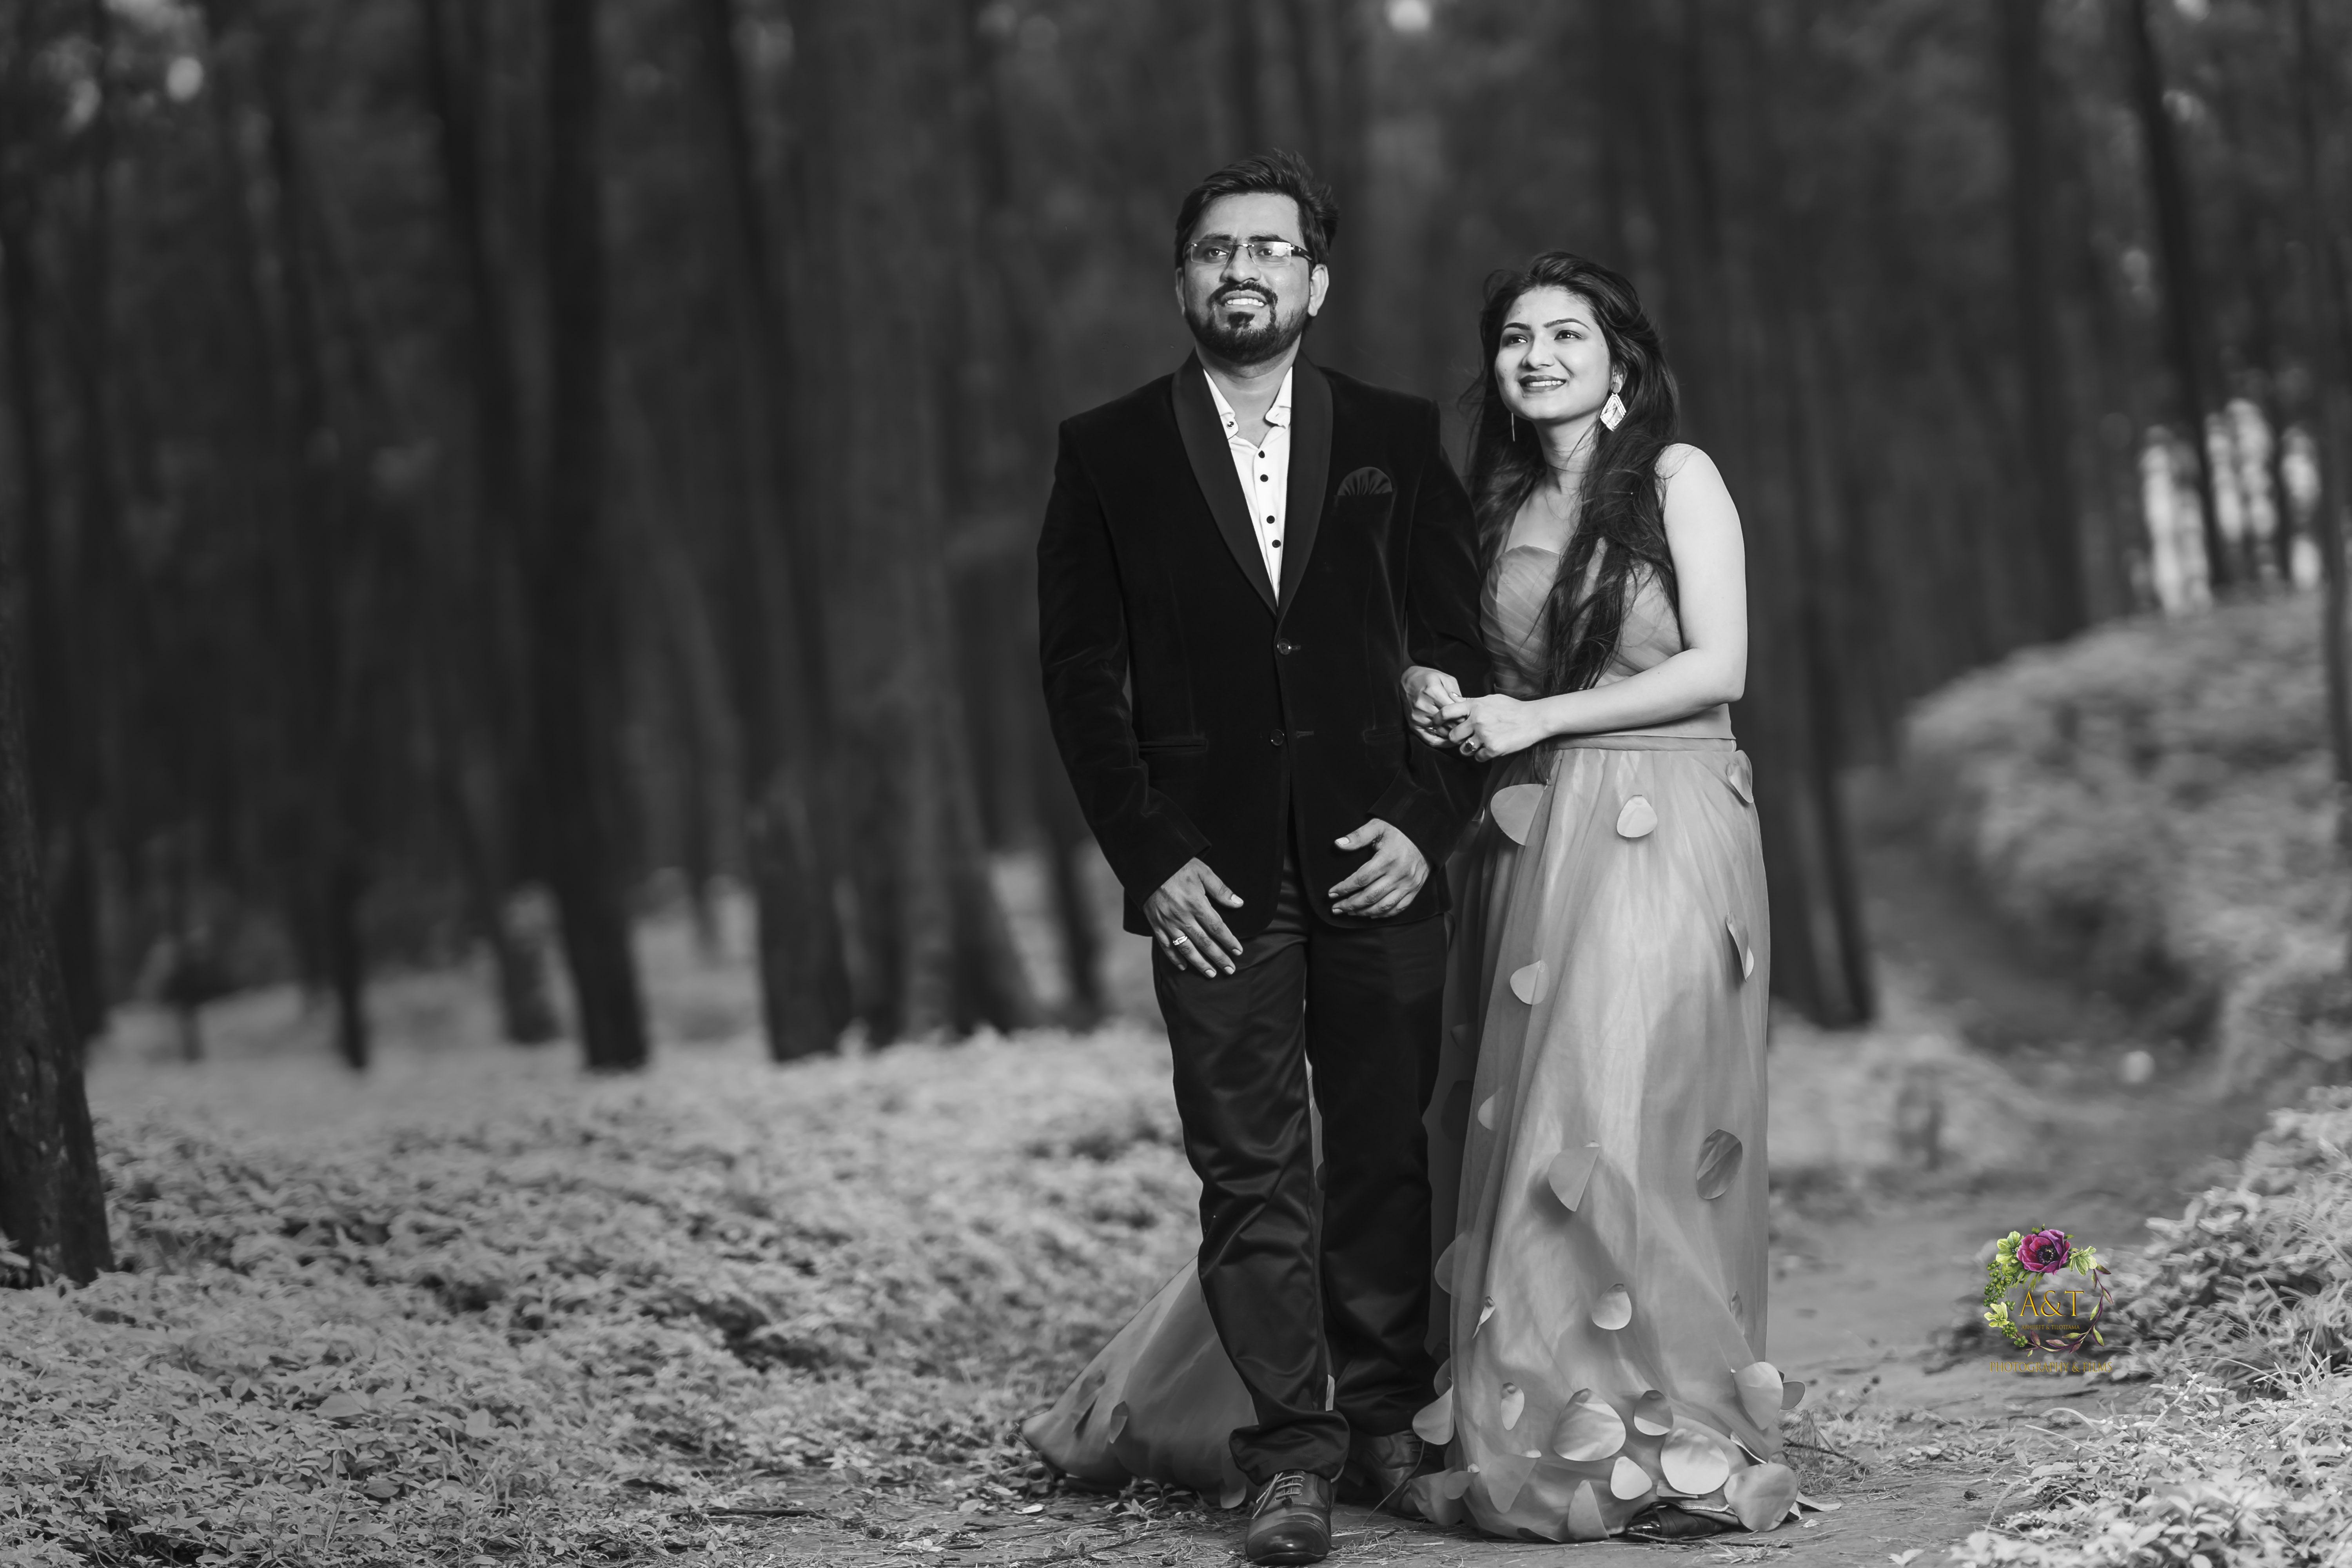 Rajani-Umesh10|Best Prewedding Photographer in Pune|India|Black and White Couple Pictures 